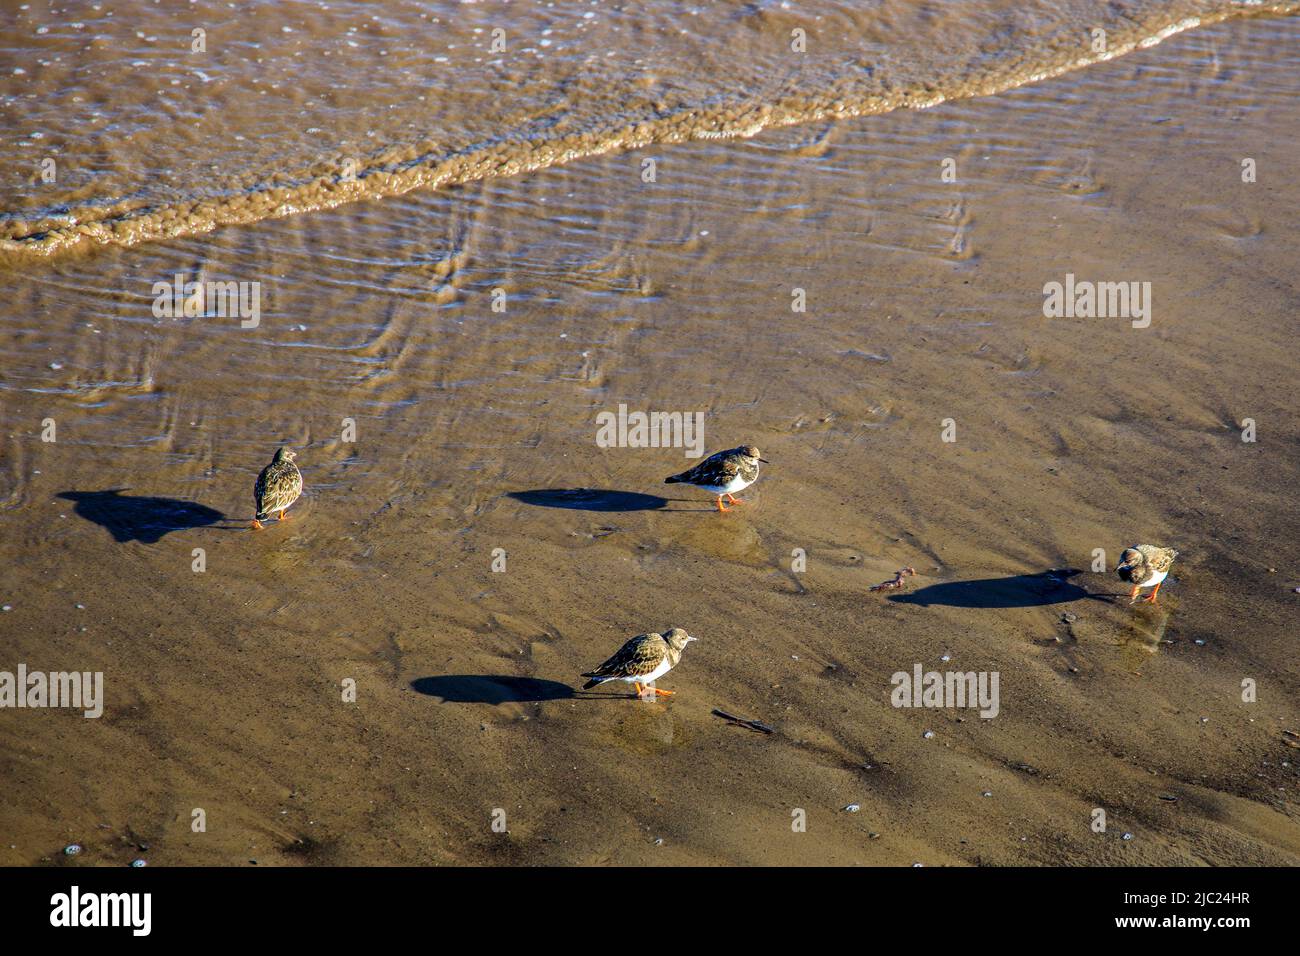 A group of ruddy turnstones (Arenaria interpres) in the harbour at Lyme Regis on the Jurassic Coast, Dorset, England, UK Stock Photo